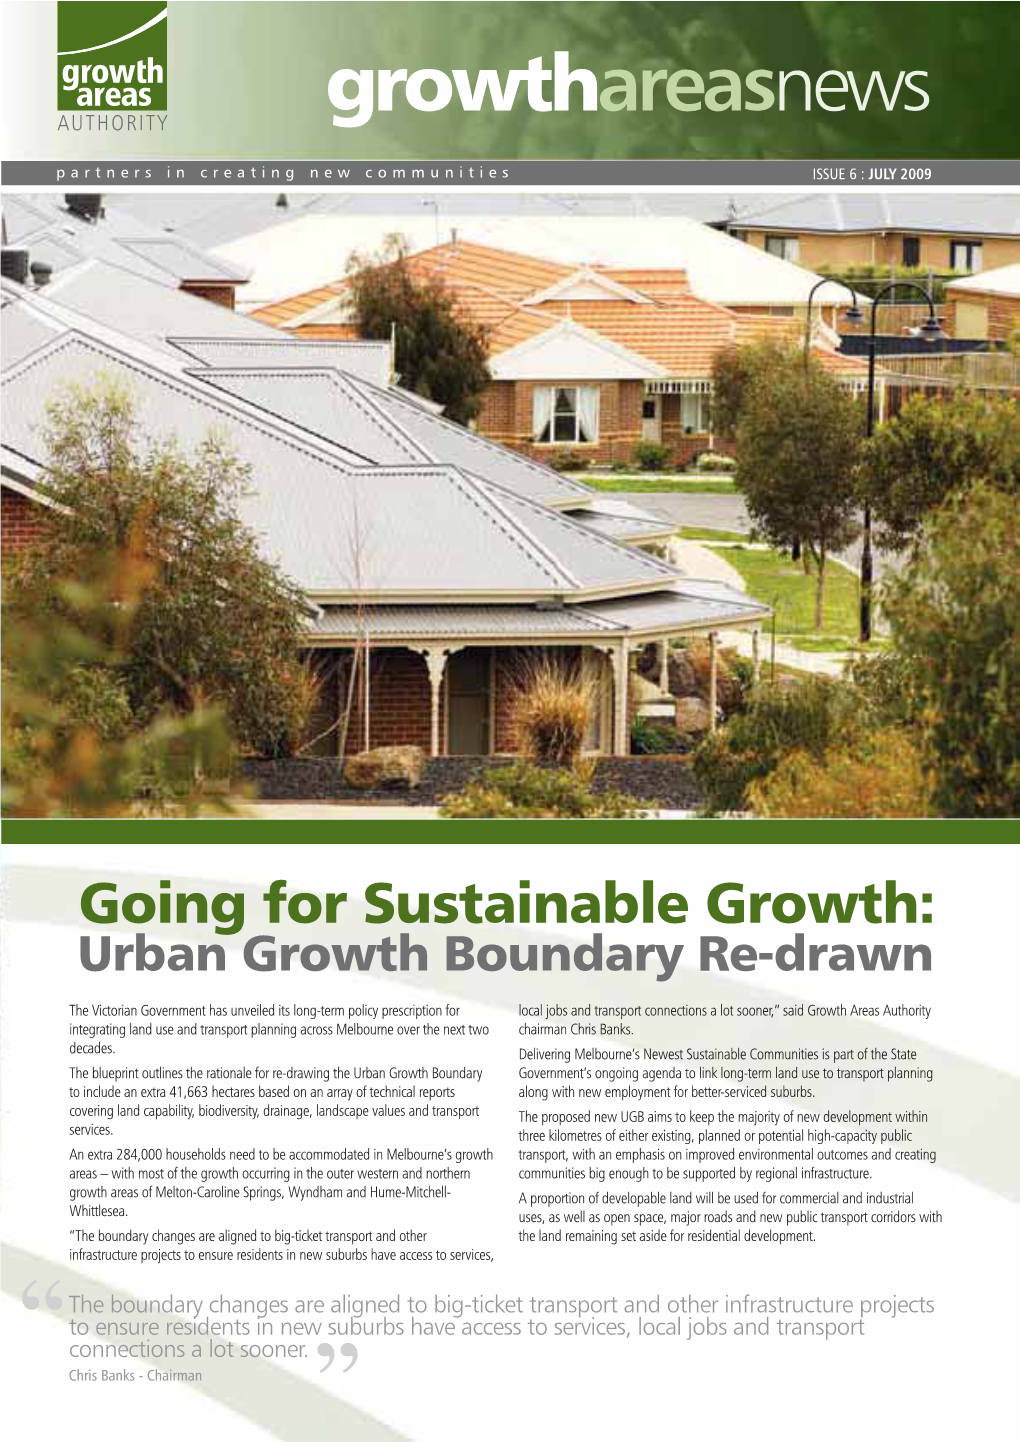 Going for Sustainable Growth: Urban Growth Boundary Re-Drawn